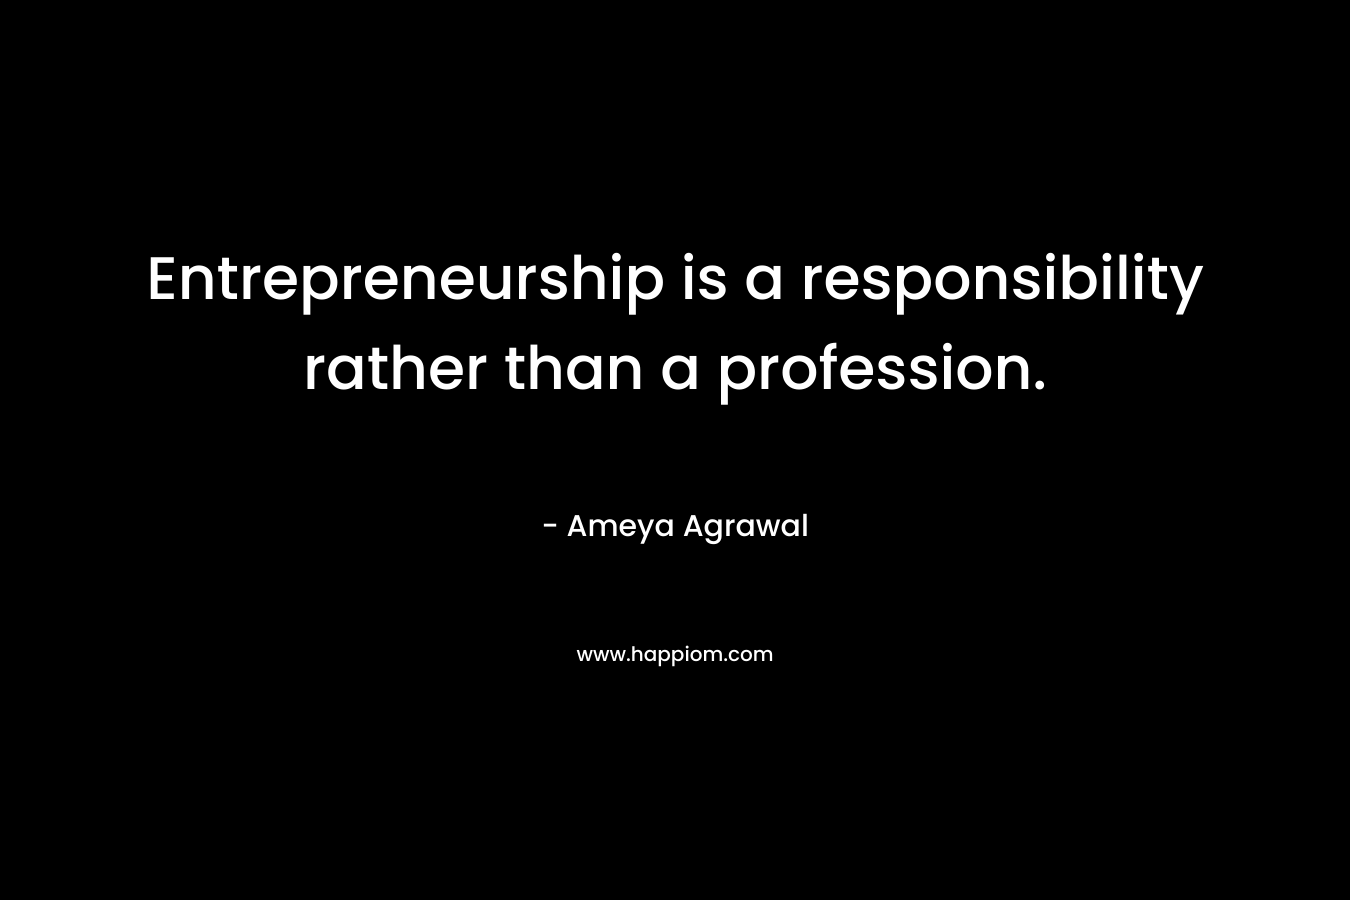 Entrepreneurship is a responsibility rather than a profession. – Ameya Agrawal